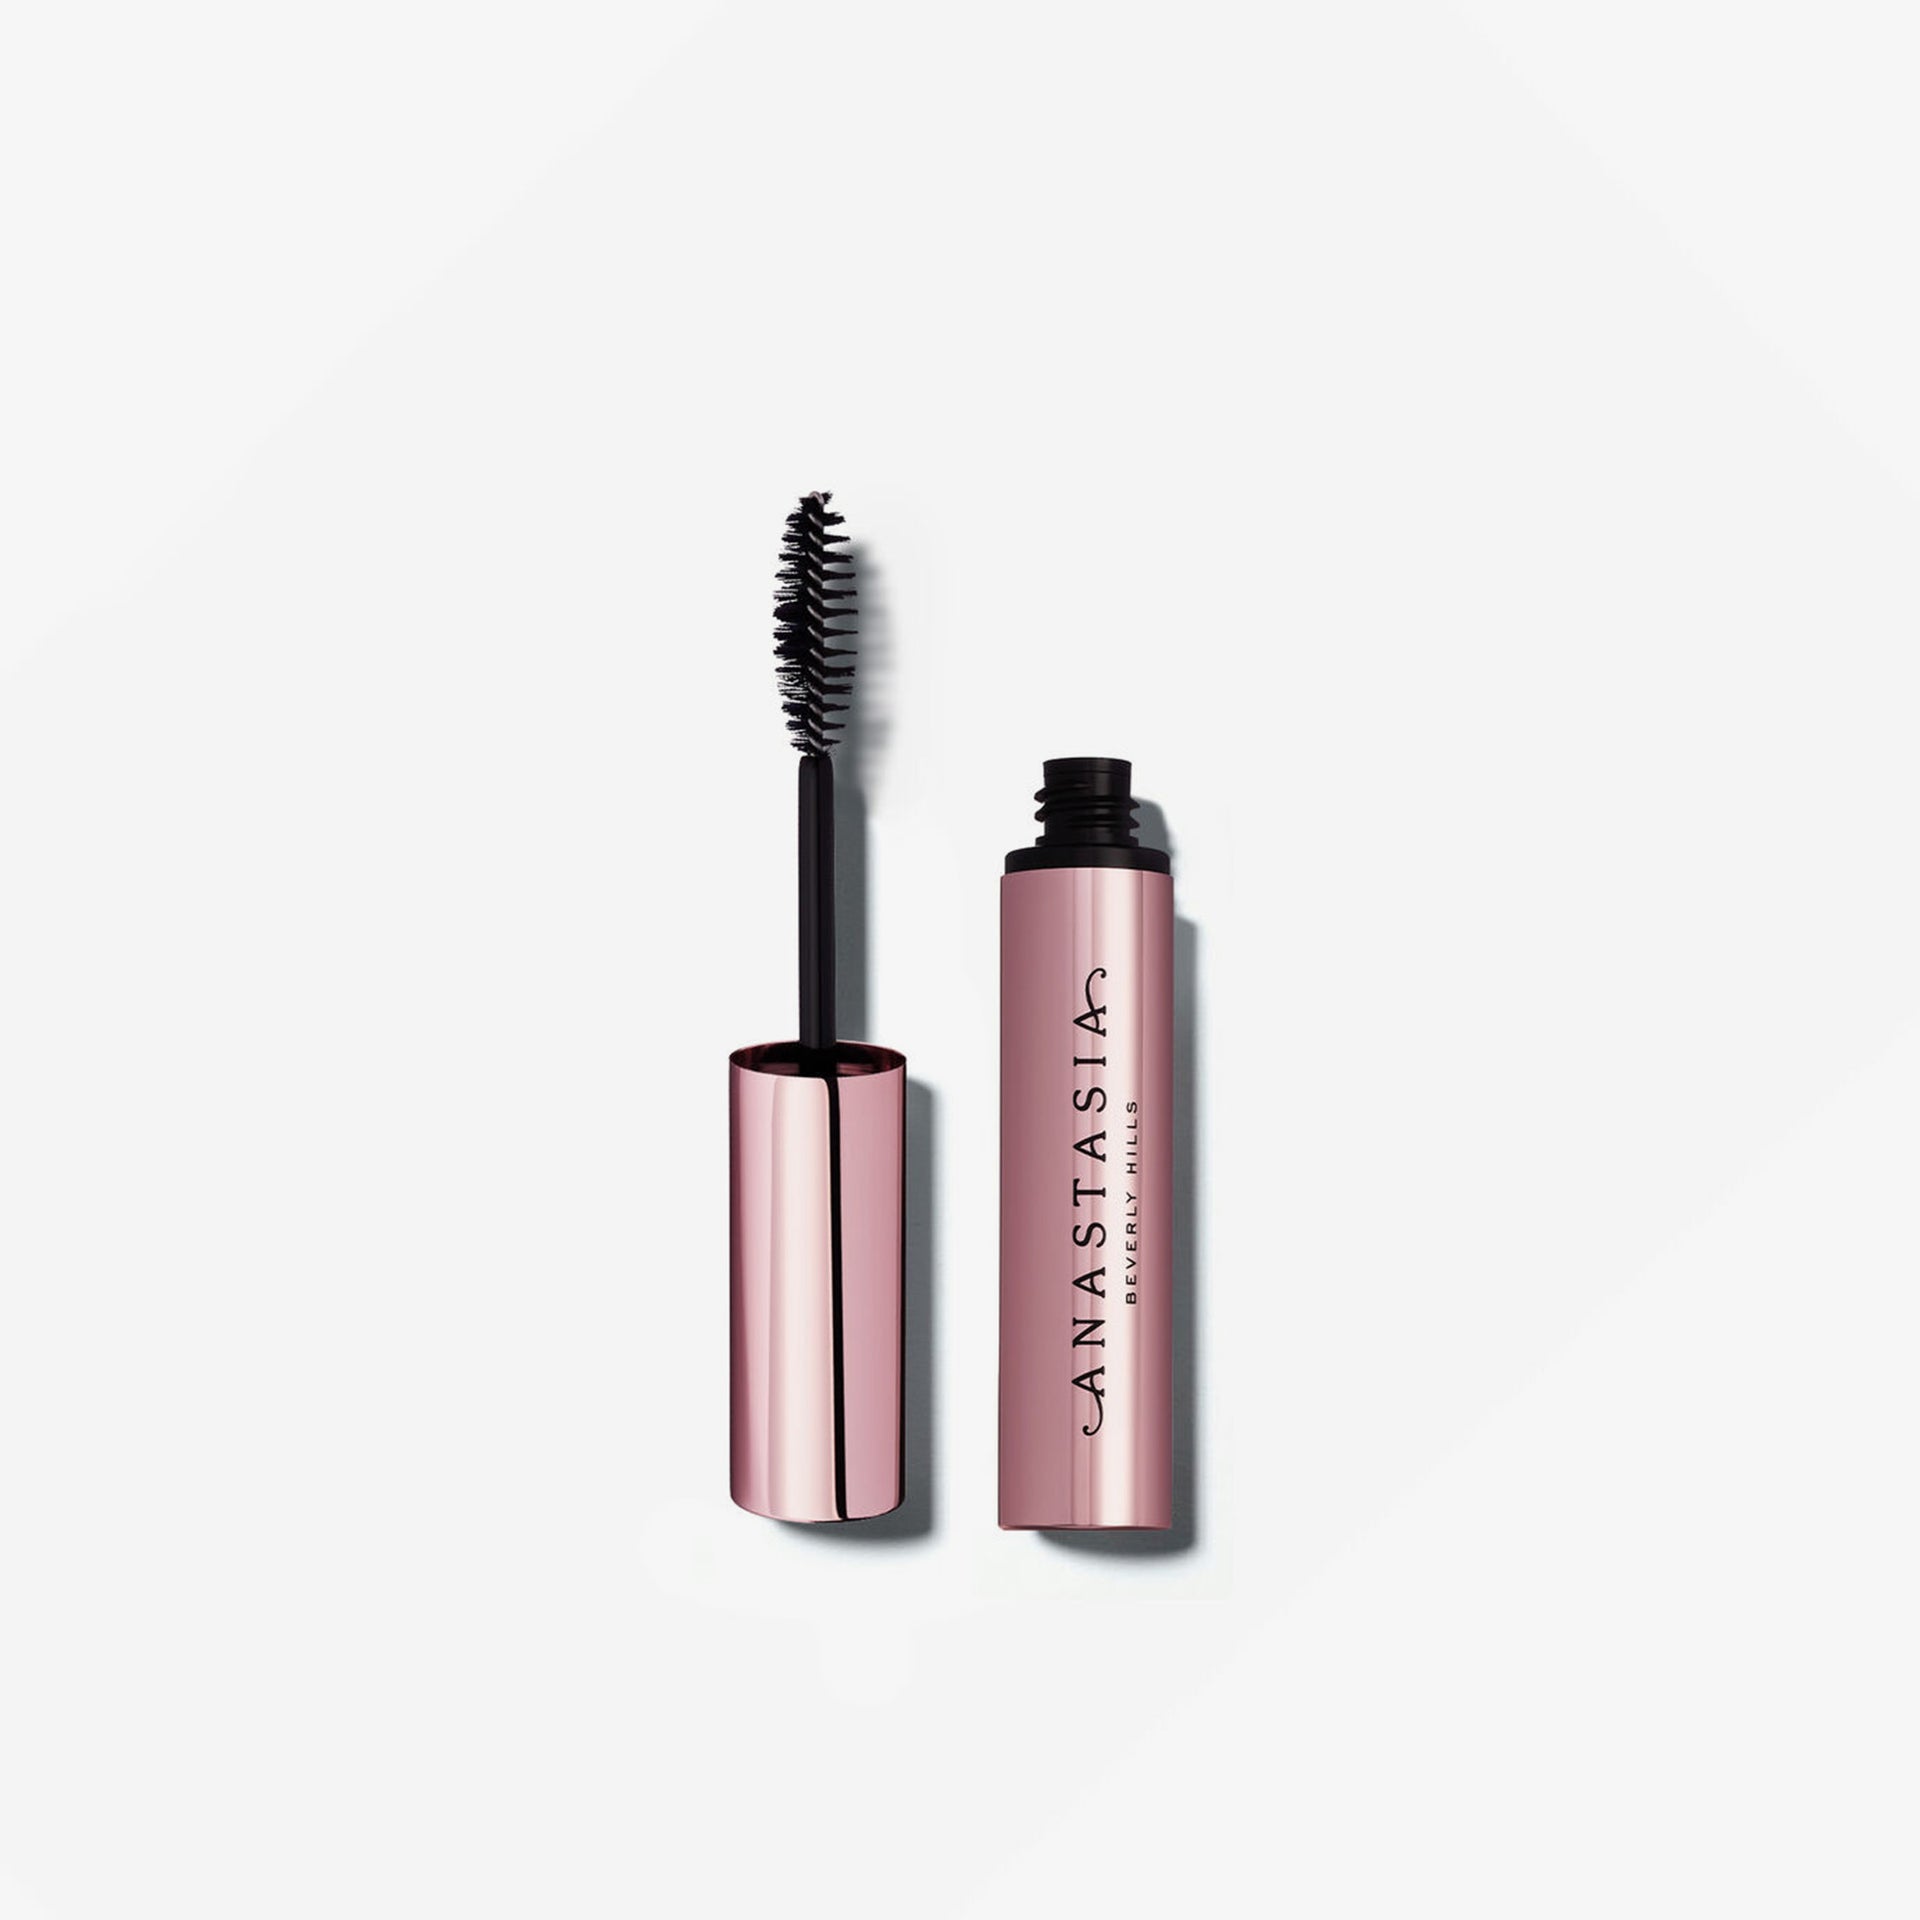 Open Fuller Looking & Feathered Brow Kit - Clear Brow Gel 